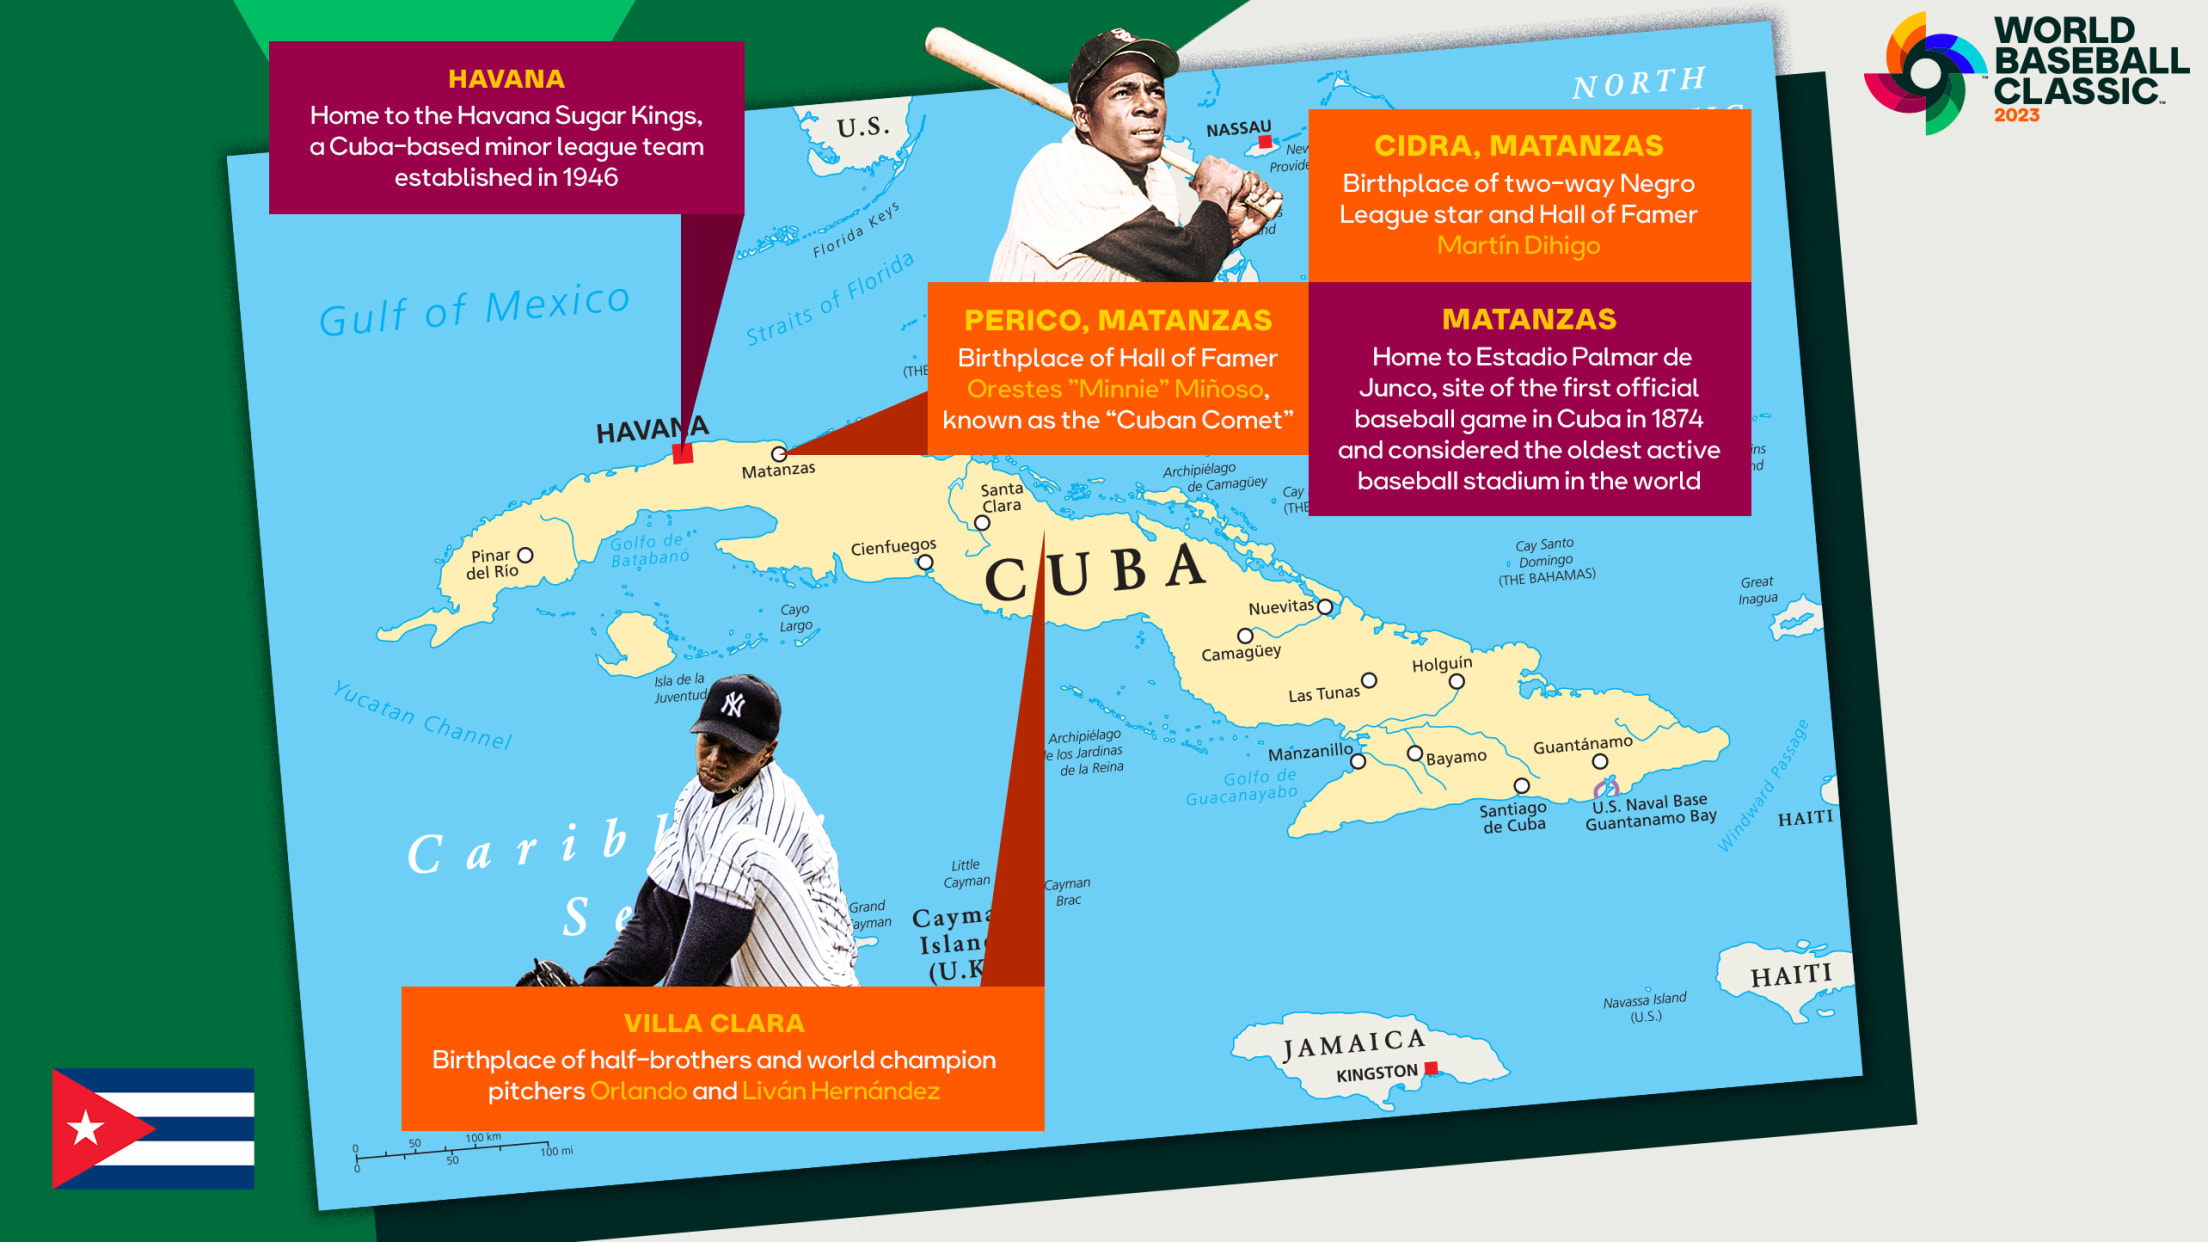 The rich history of baseball in Cuba